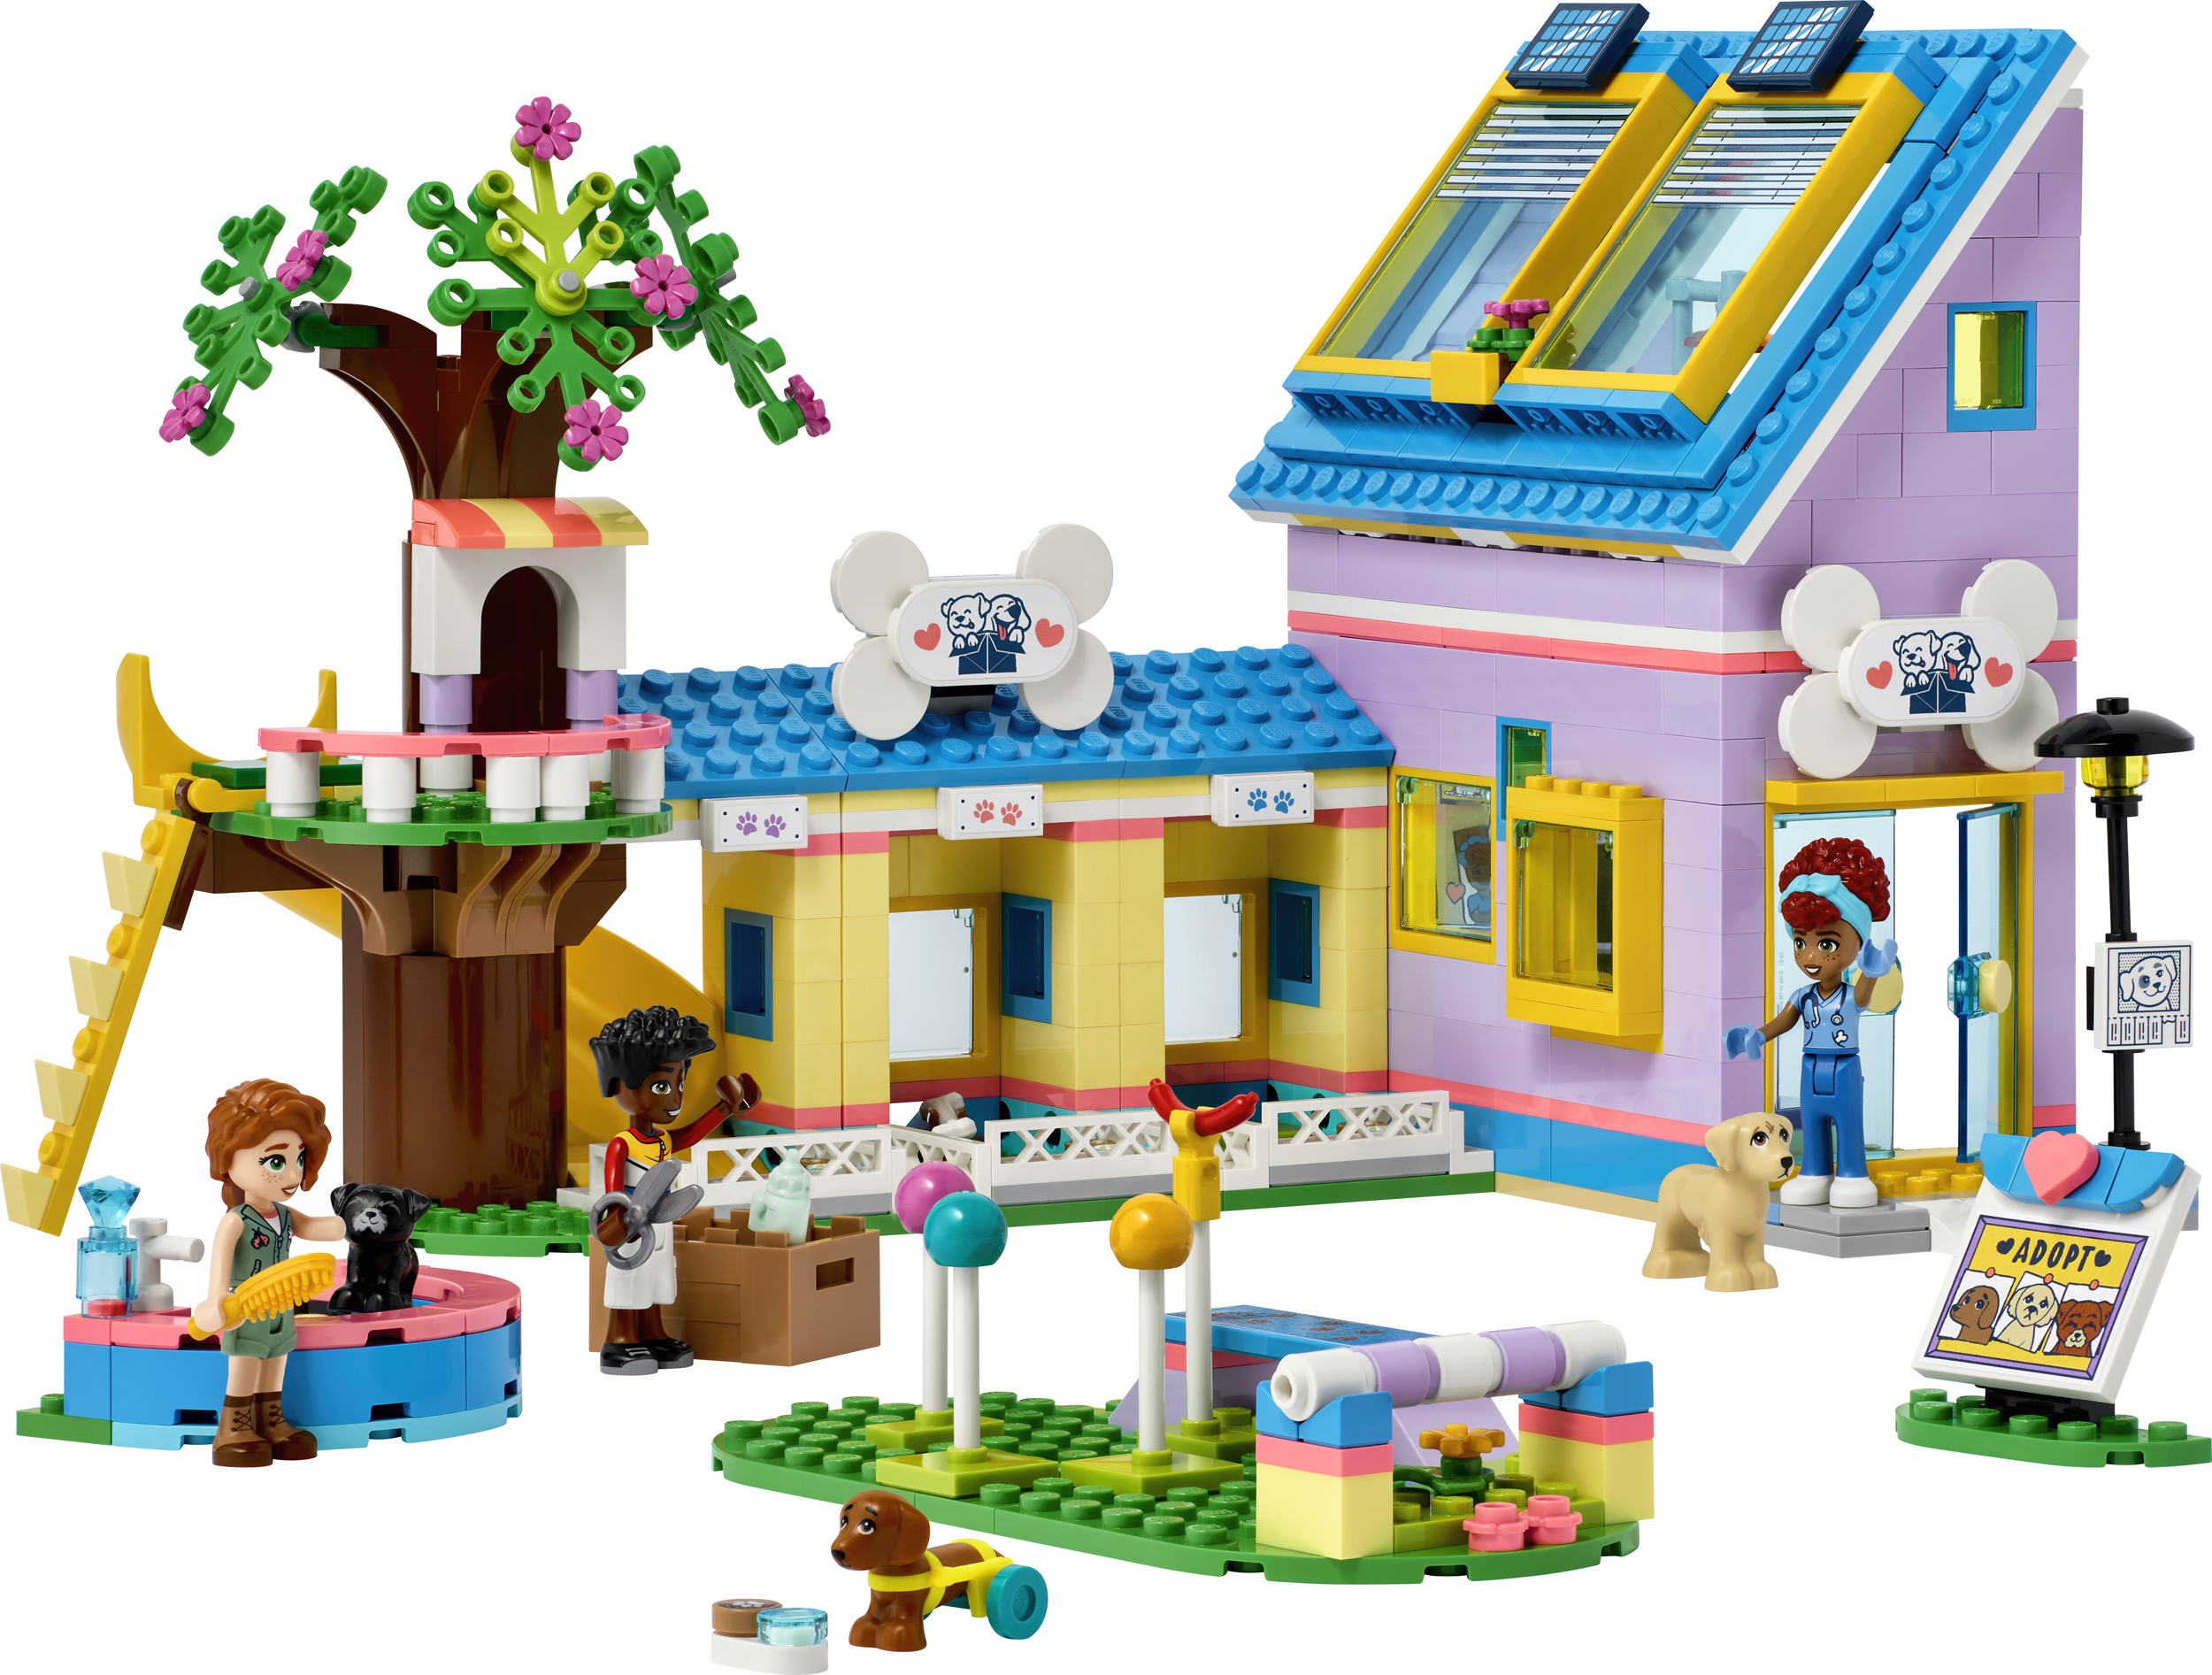 Career Diversity Check: Job stereotypes - Are LEGO City sets stuck in the  past?